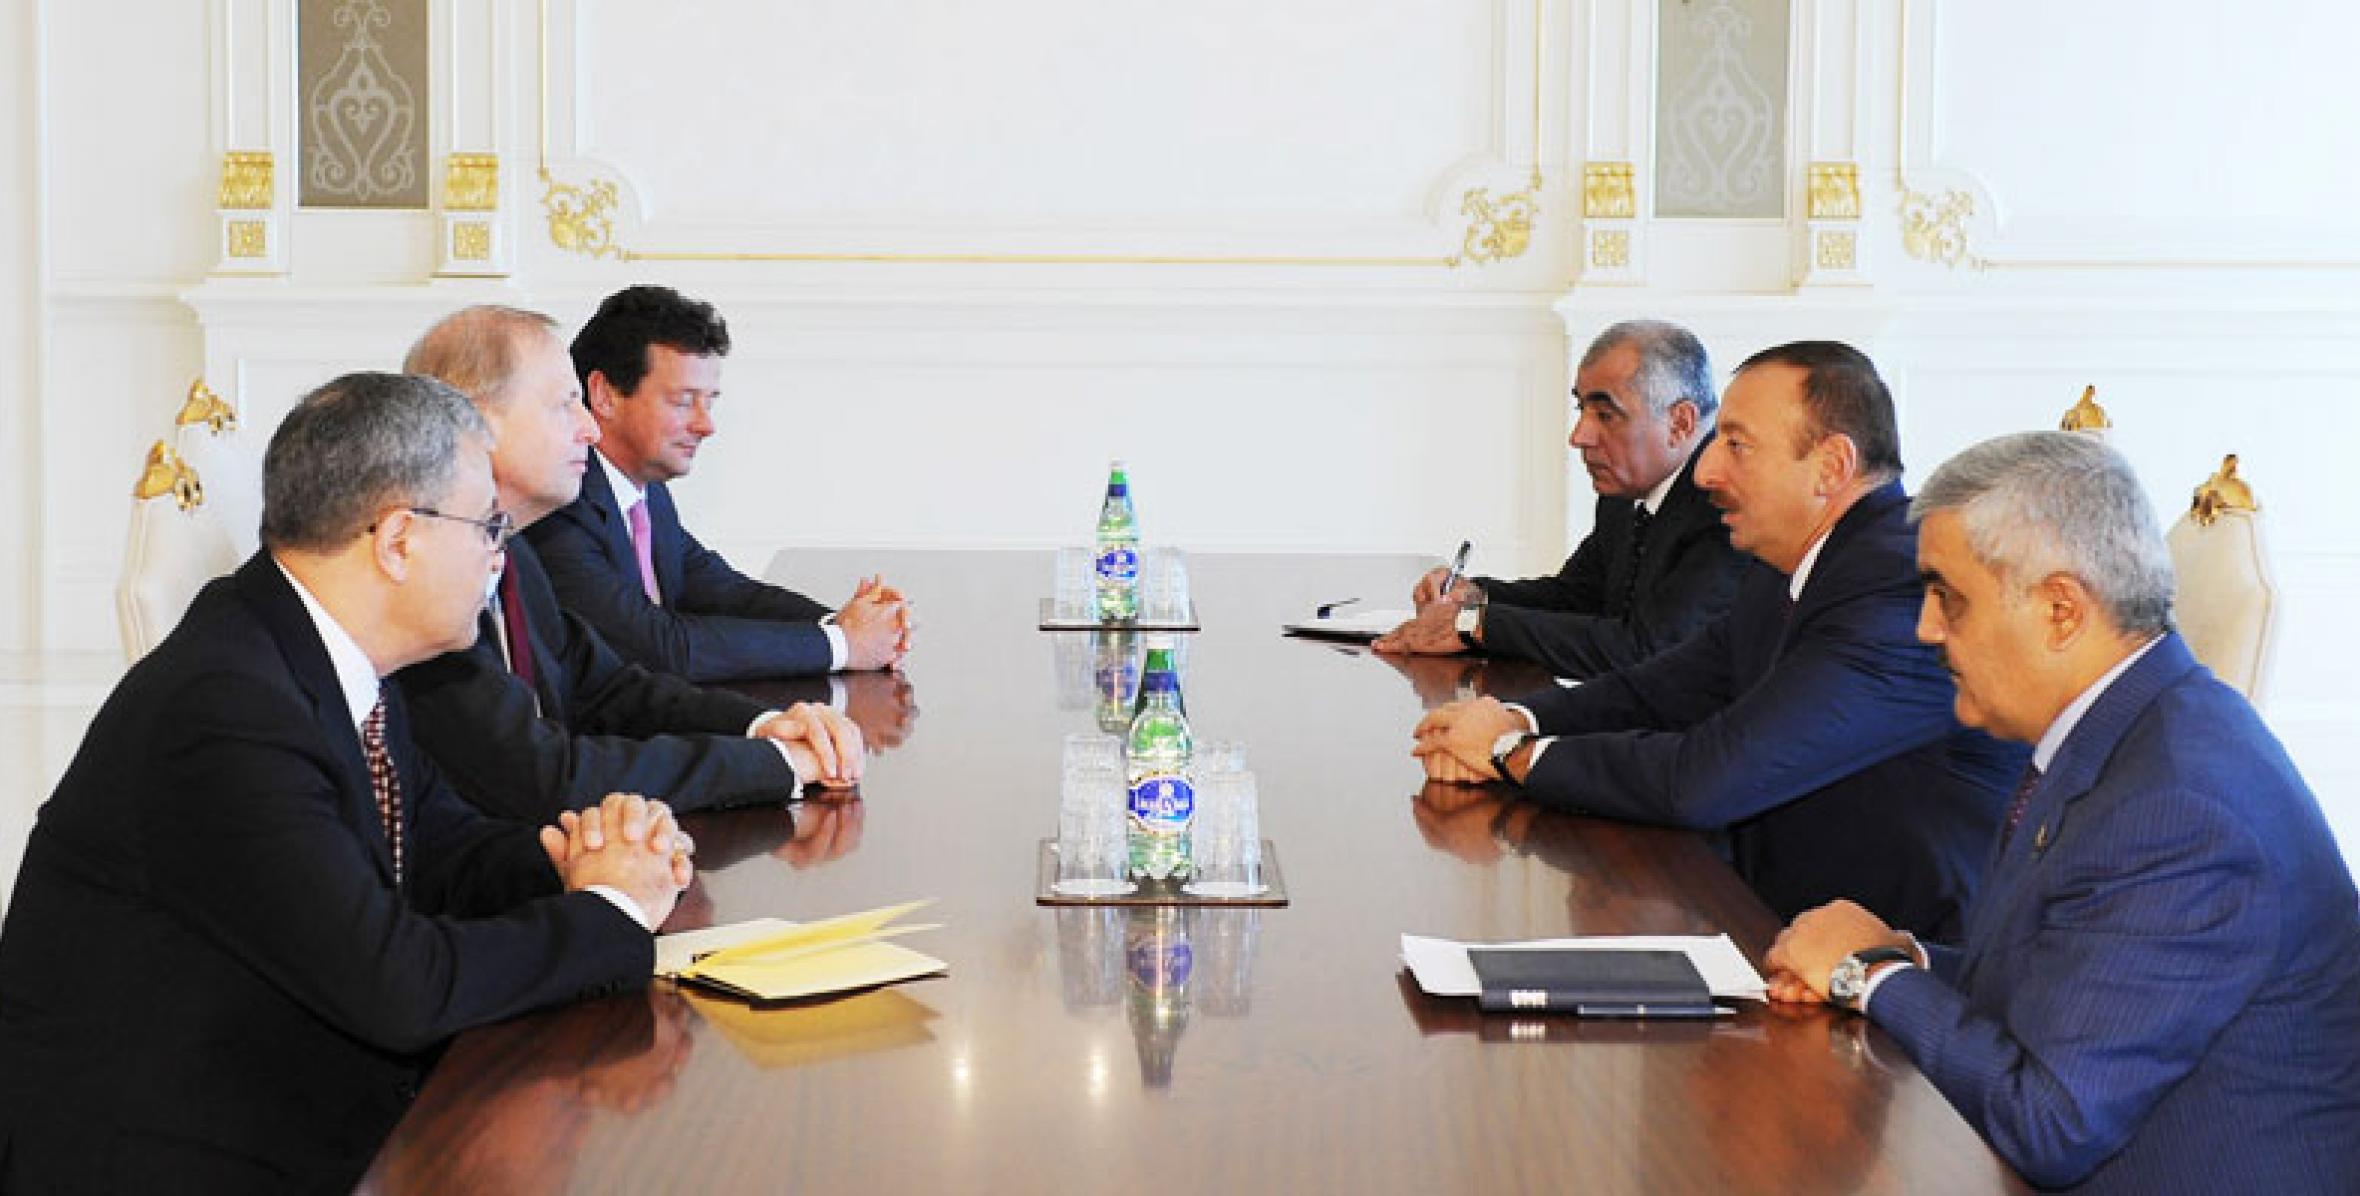 Ilham Aliyev received the executive director of BP, Robert Dudley